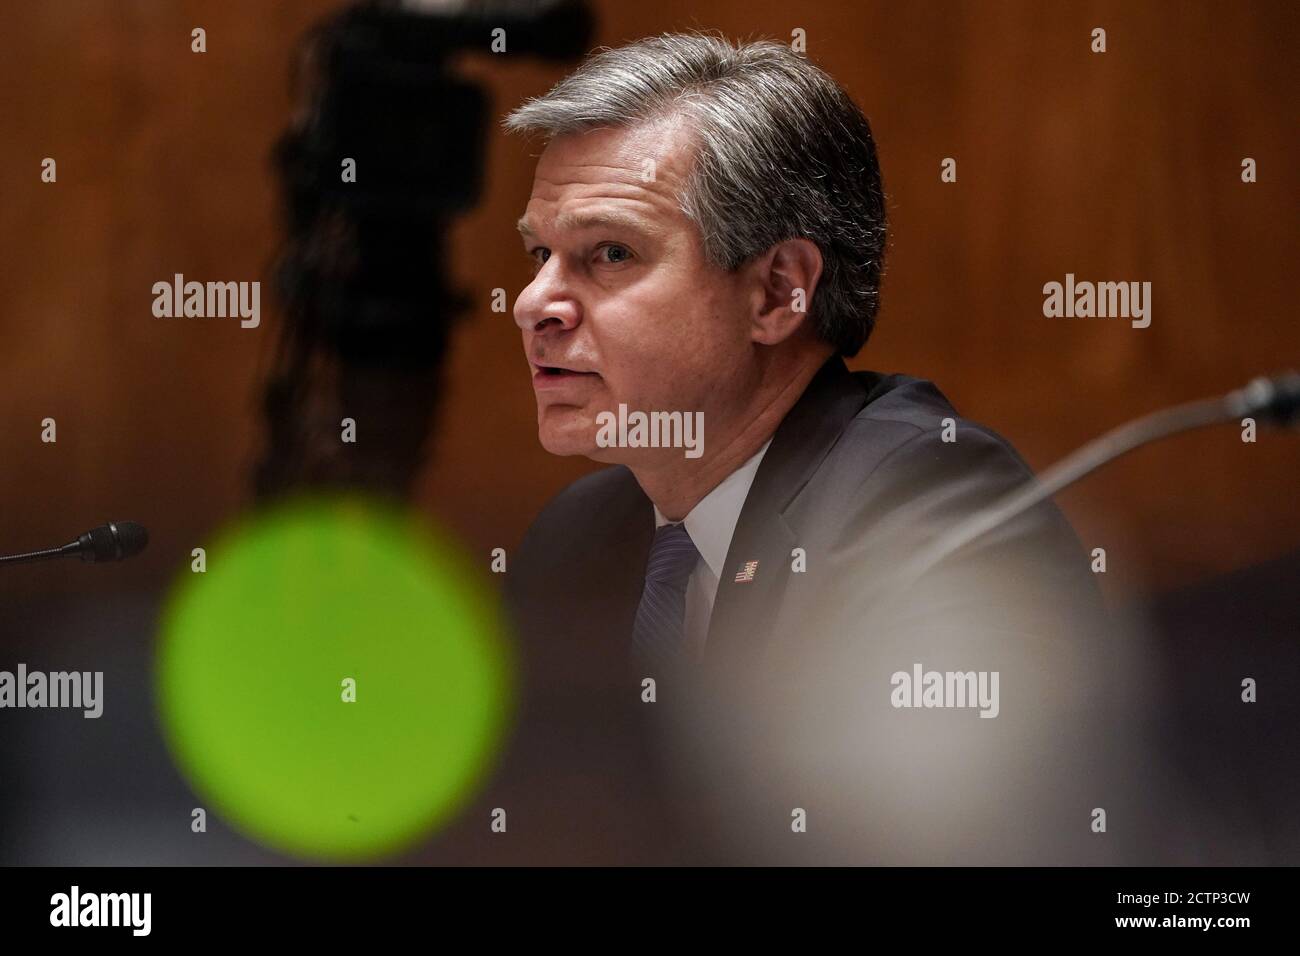 Washington, United States. 24th Sep, 2020. FBI Director Christopher Wray testifies before a Senate Homeland Security and Governmental Affairs Committee hearing on 'Threats to the Homeland' on Capitol Hillin Washington, DC on Thursday, September 24, 2020. Pool photo by Joshua Roberts/UPI Credit: UPI/Alamy Live News Stock Photo